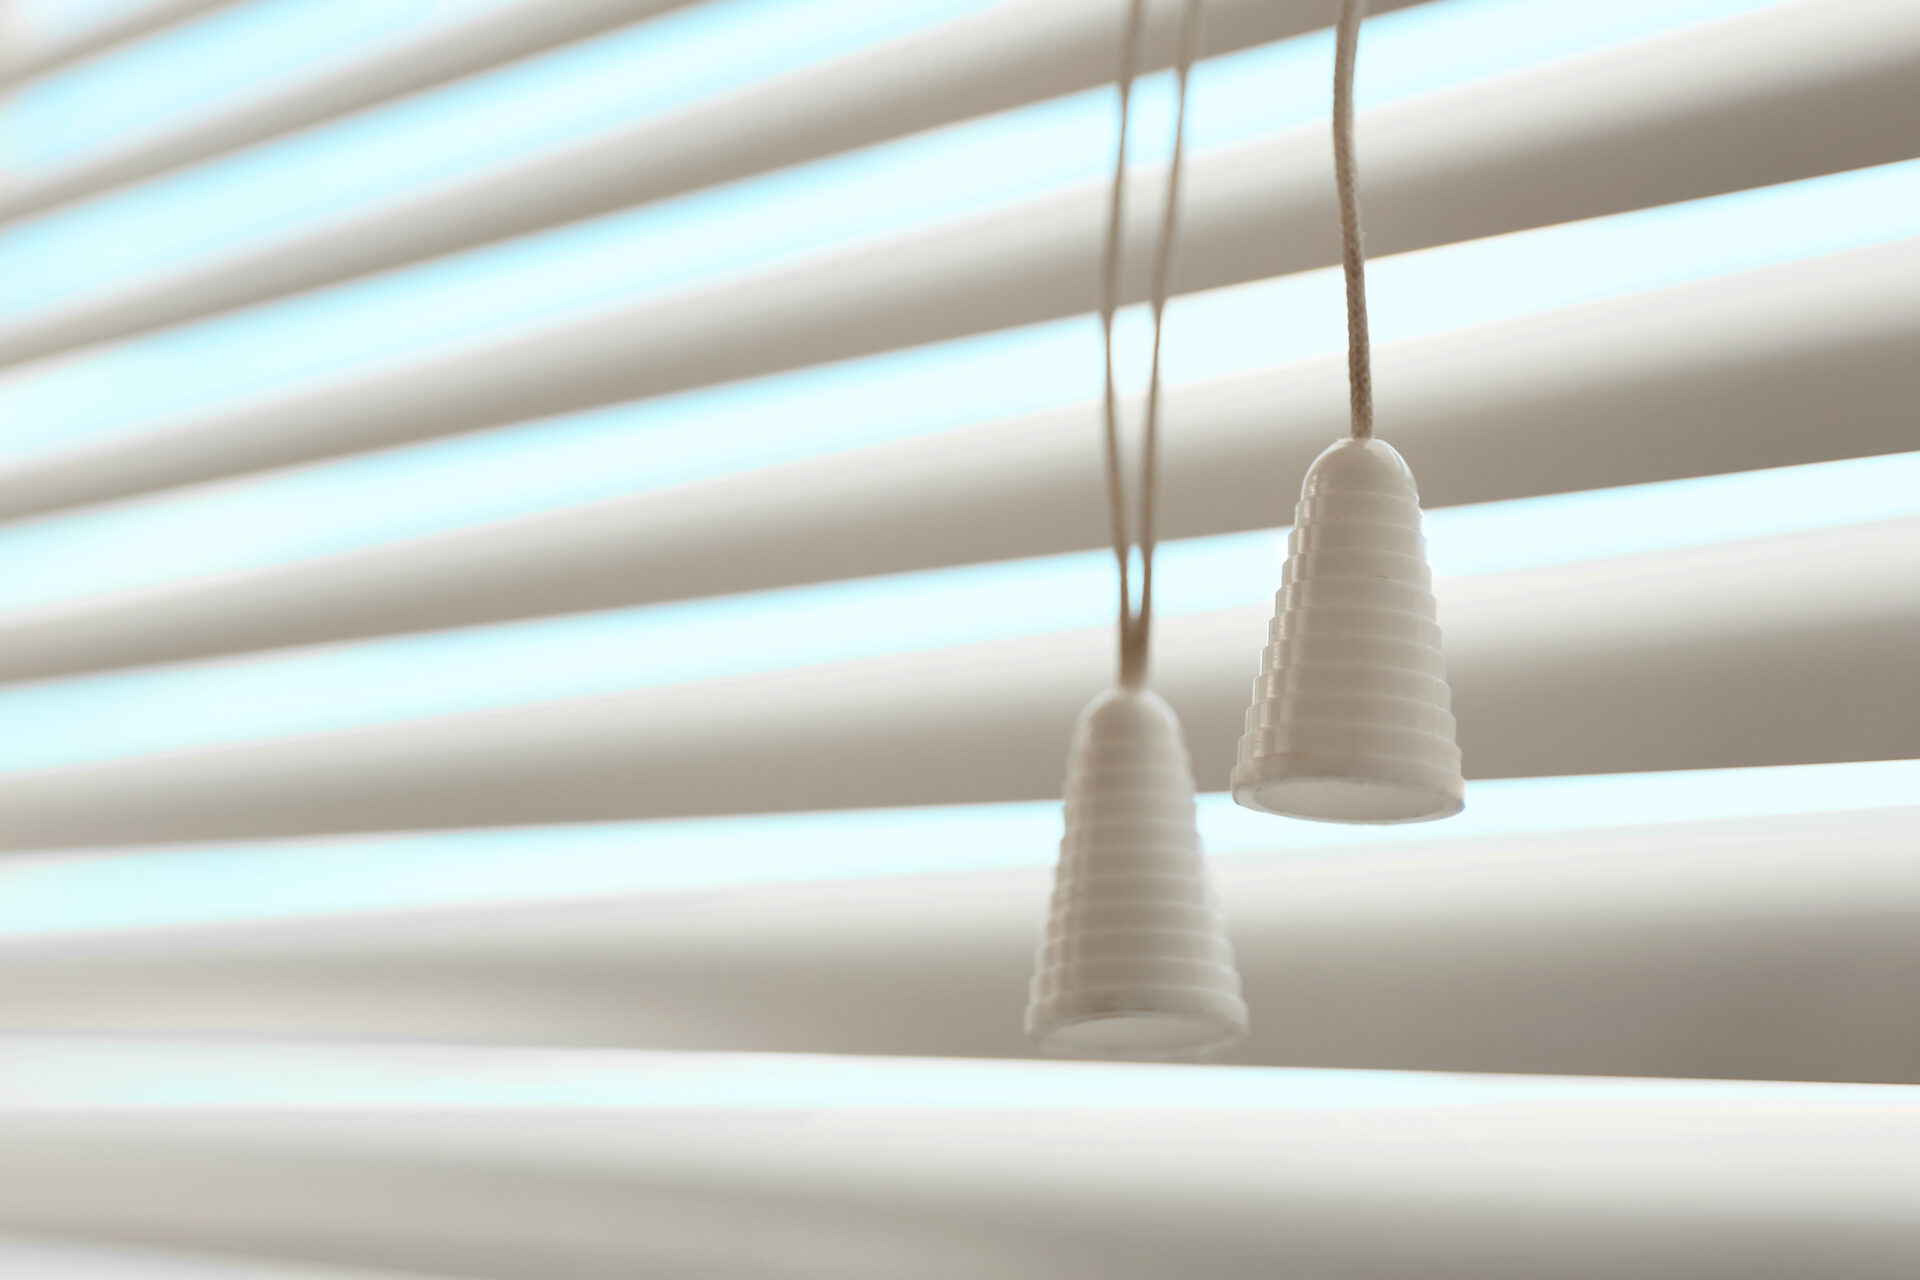 Closeup view of closed horizontal window blinds with cords